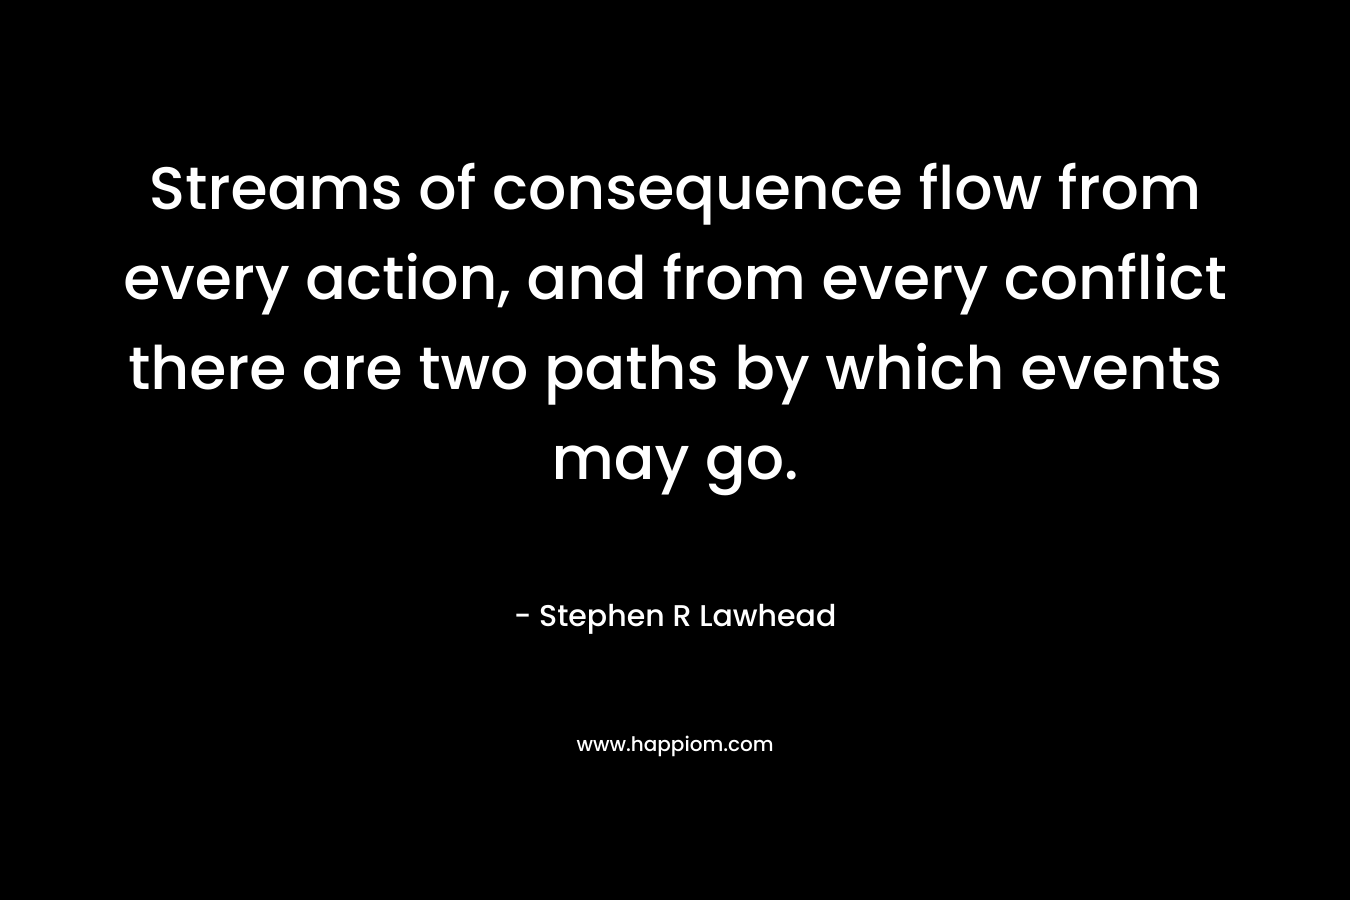 Streams of consequence flow from every action, and from every conflict there are two paths by which events may go. – Stephen R Lawhead